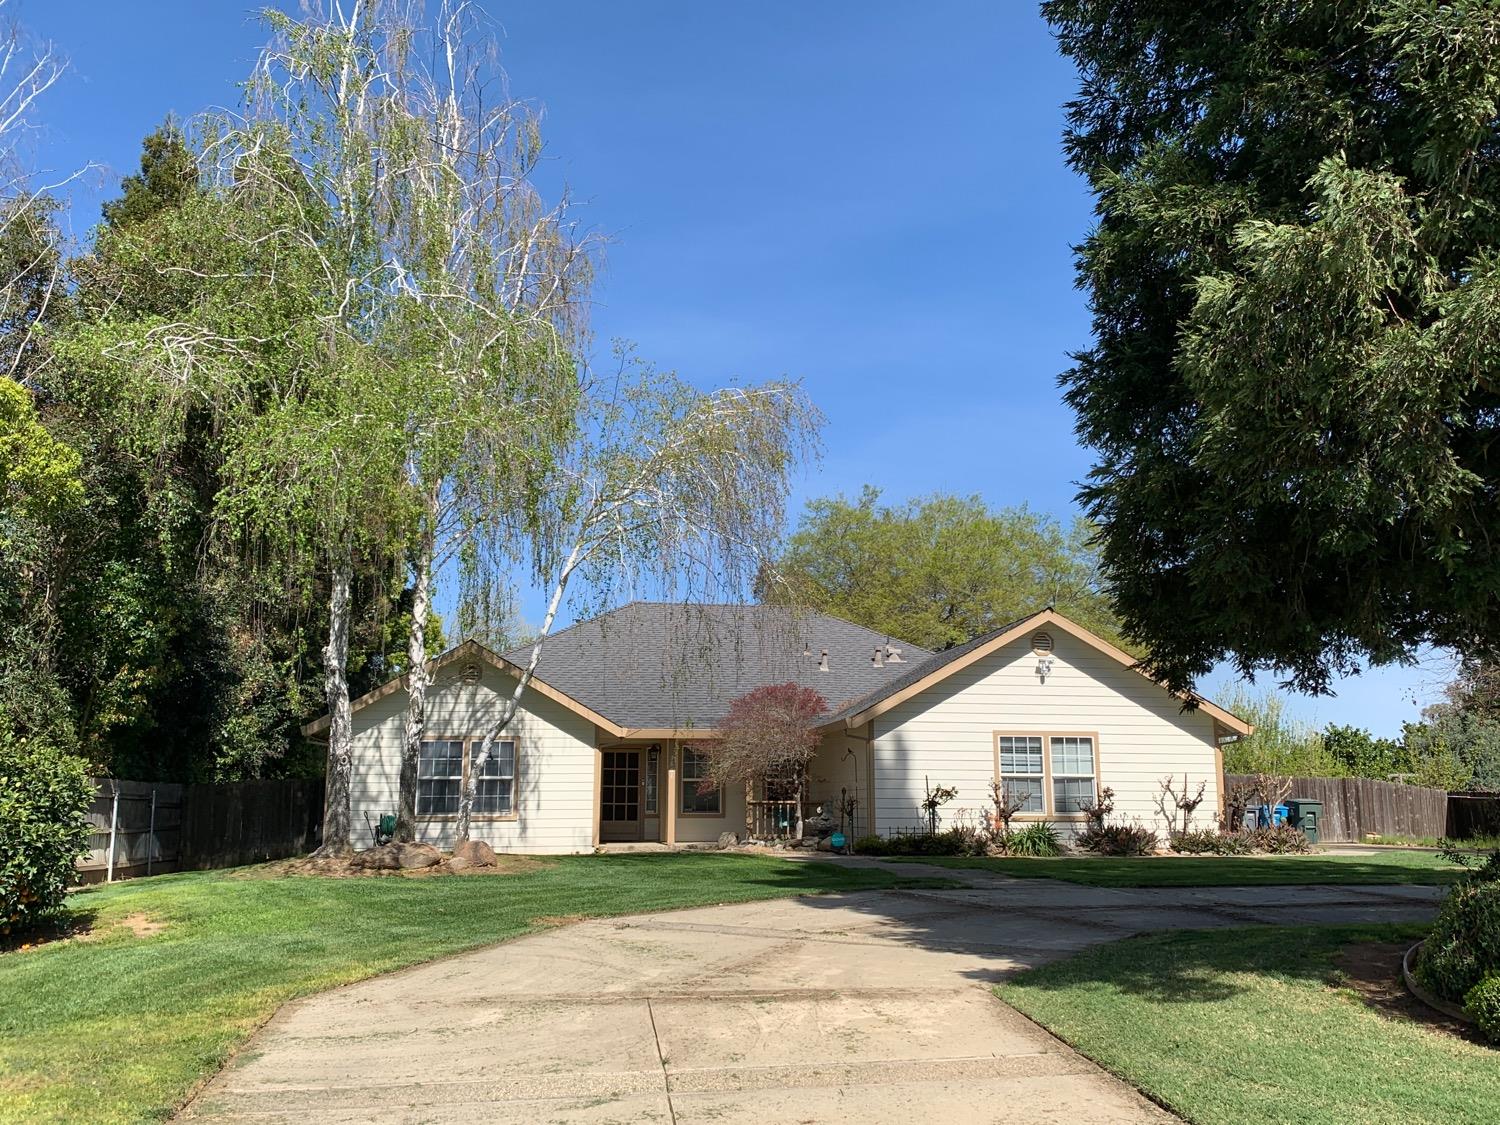 Photo of 7861 Butte Ave in Sutter, CA